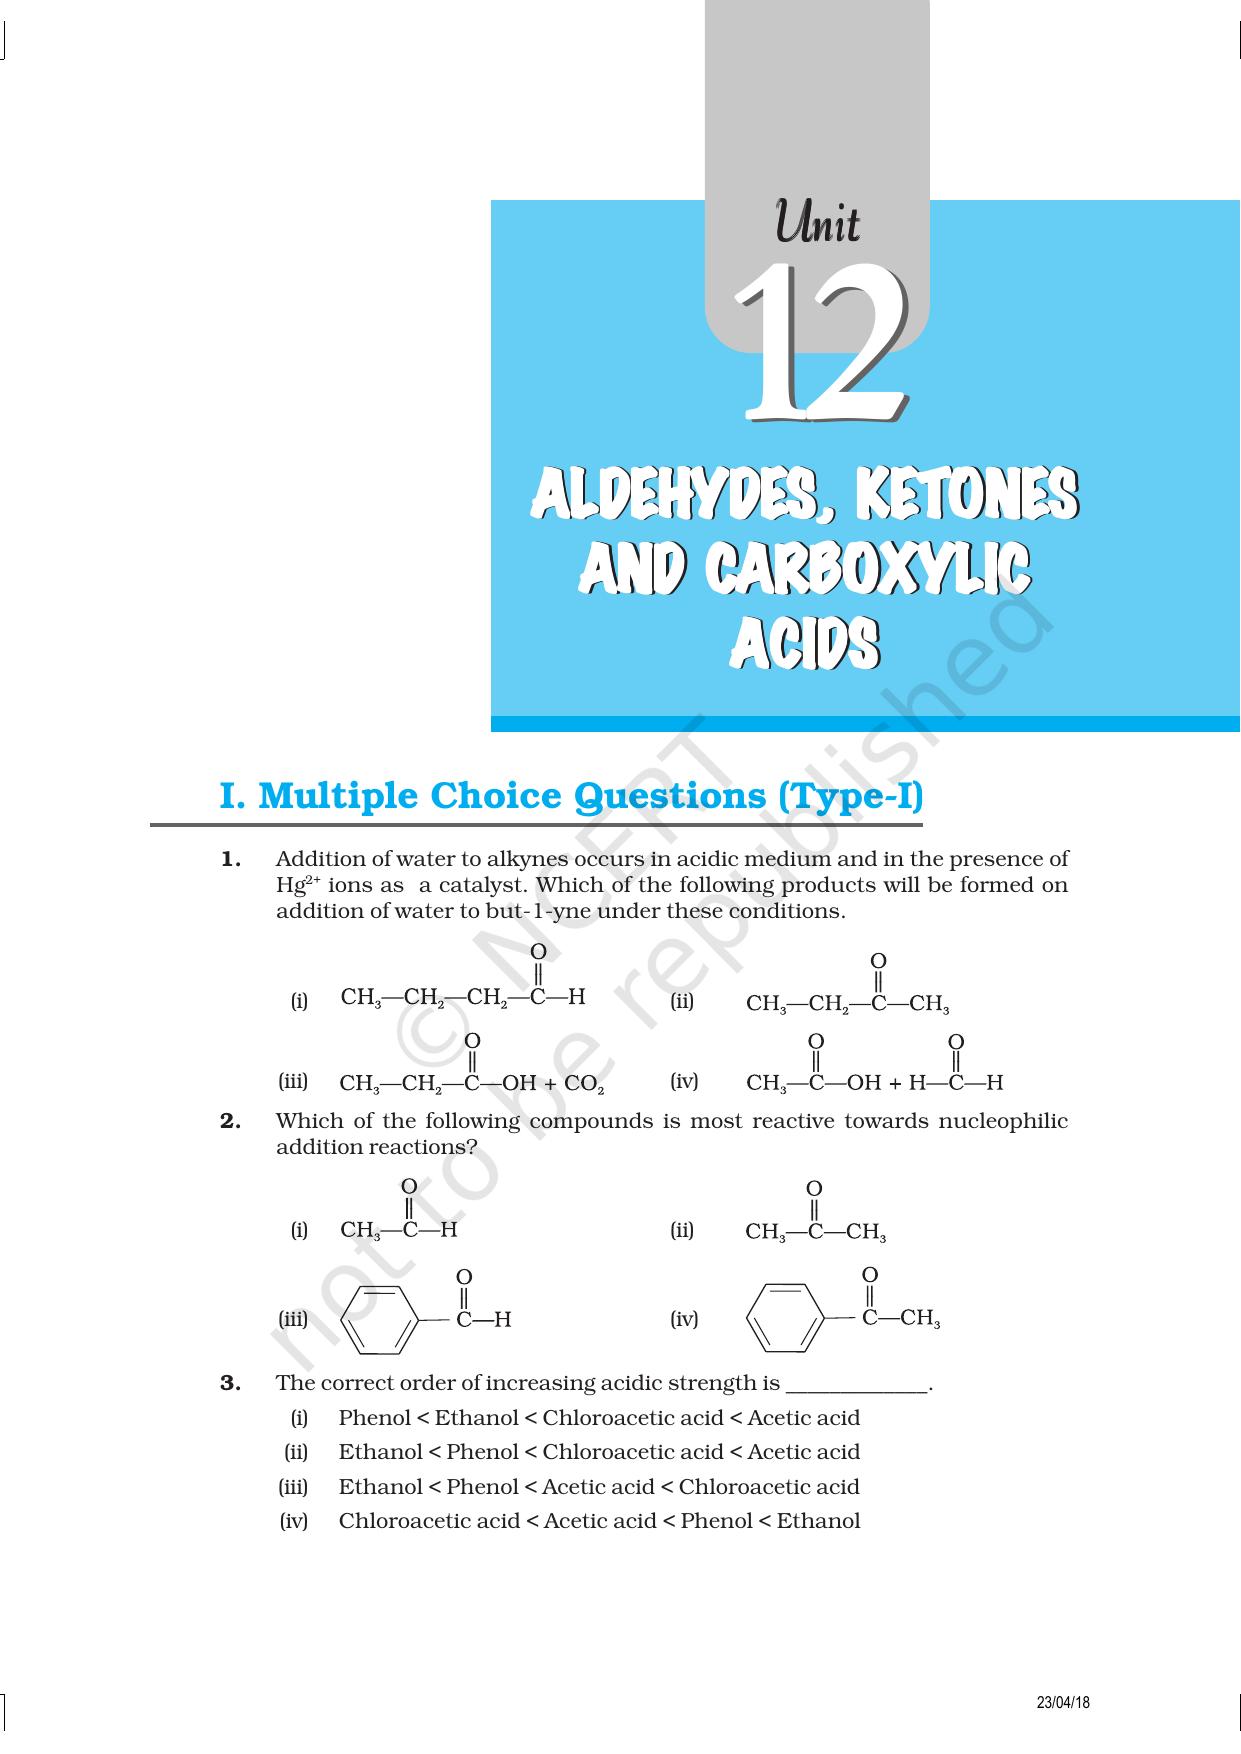 NCERT Exemplar Book for Class 12 Chemistry: Chapter 12 Aldehydes, Ketones and Carboxylic Acids - Page 1